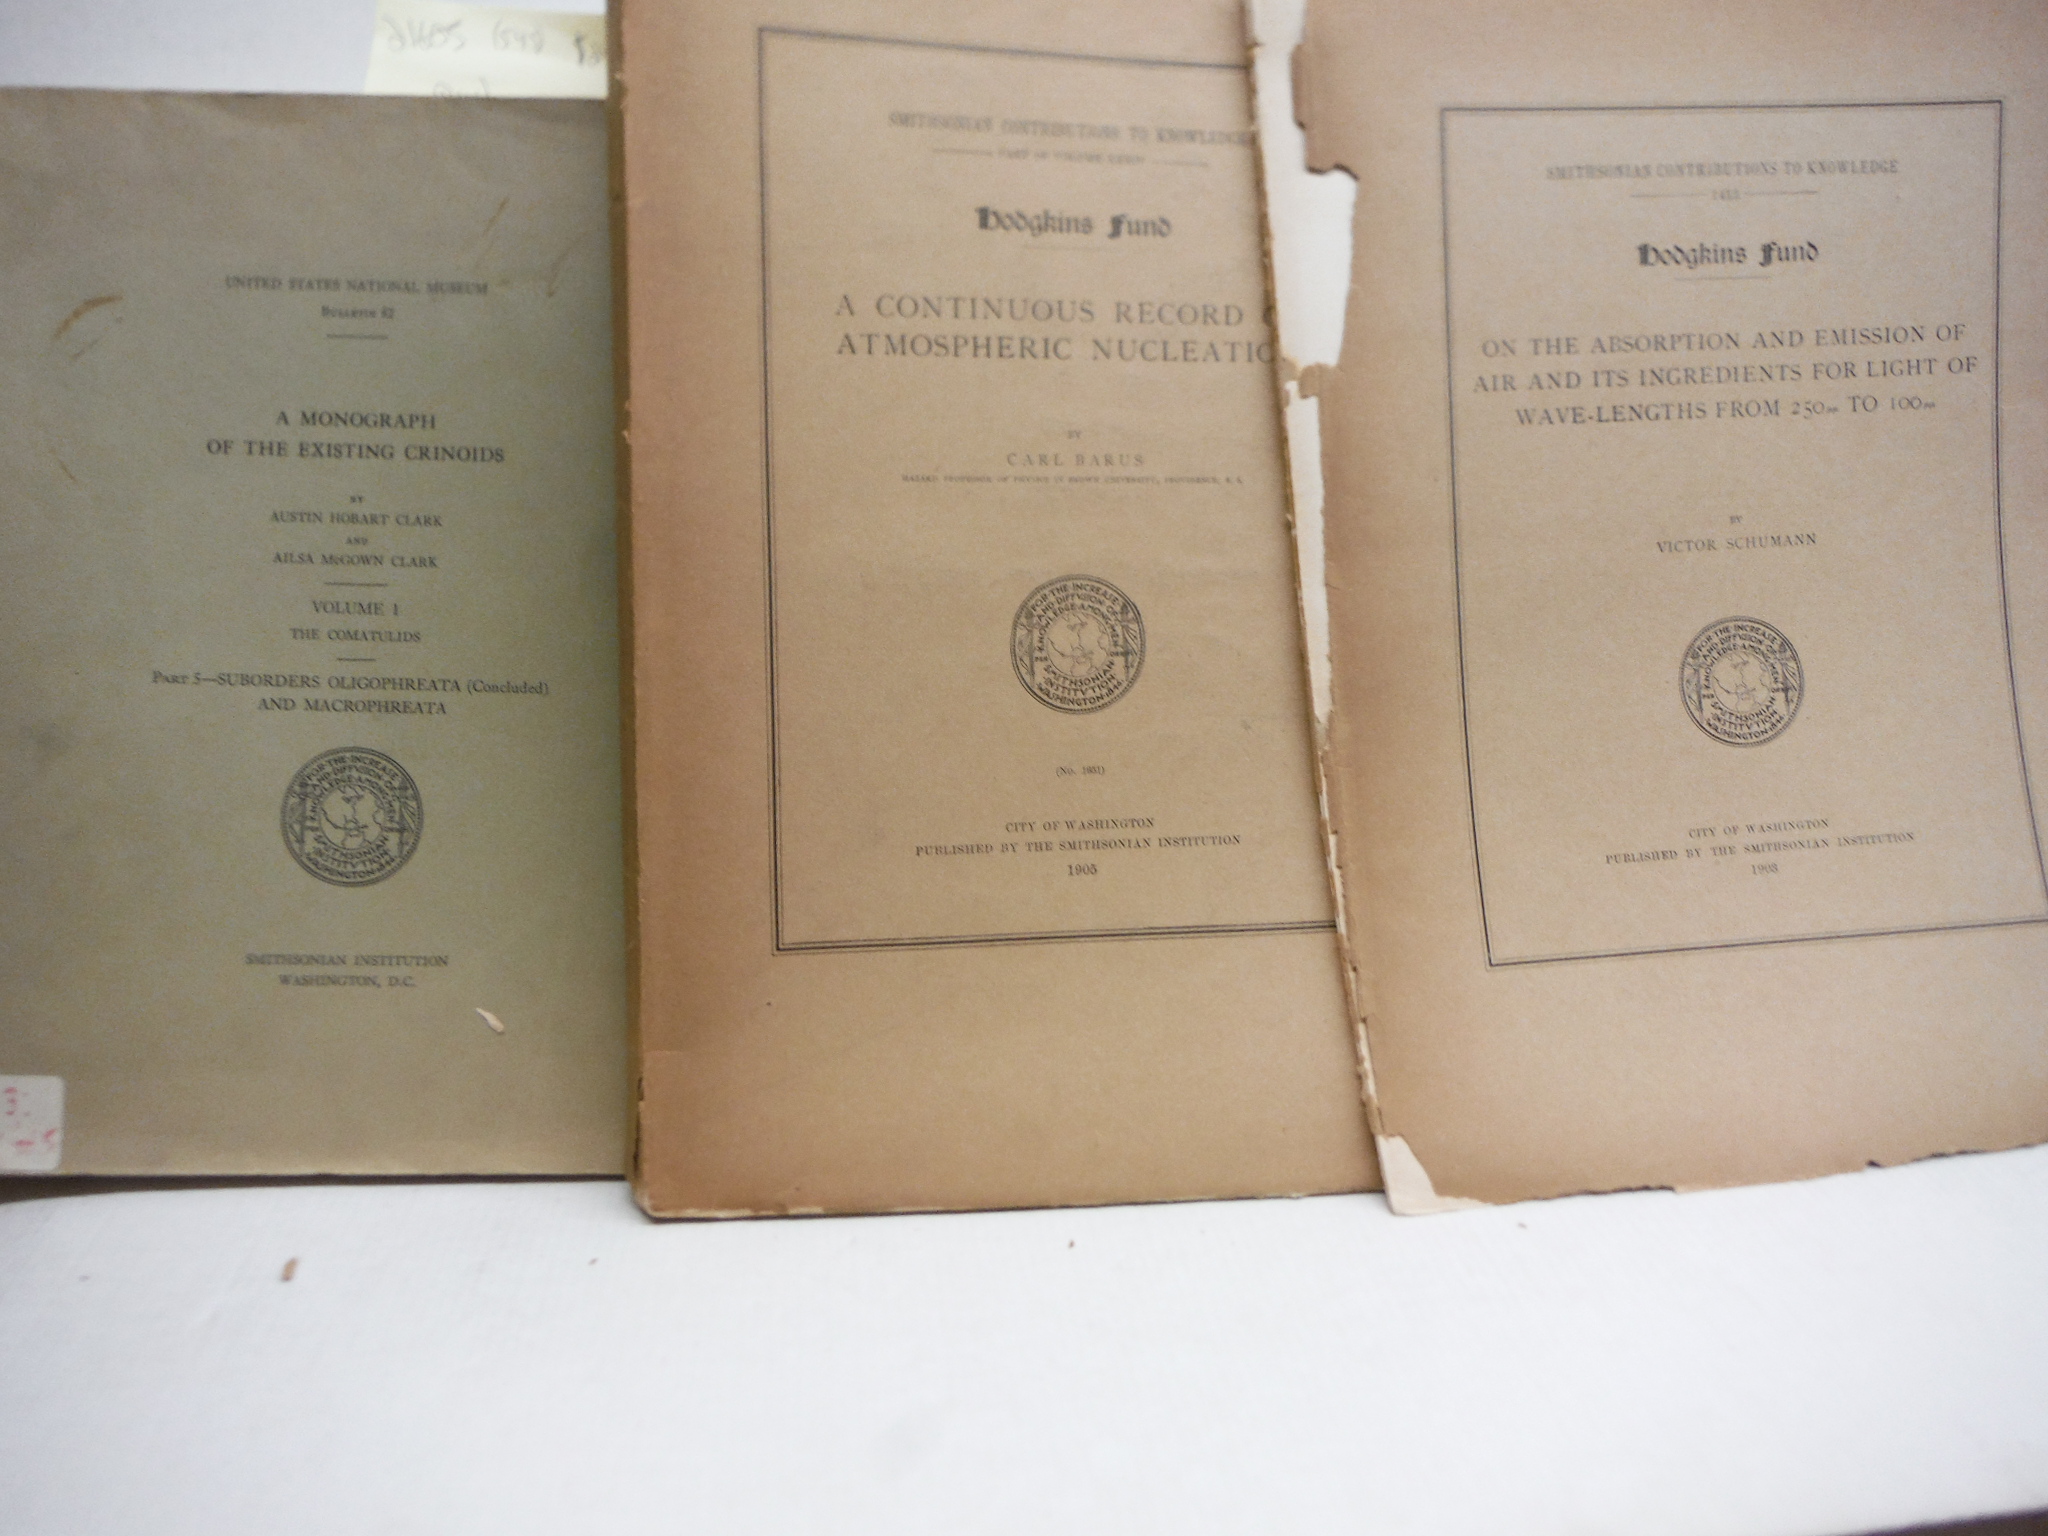 Lot of 3 original books from the US National Museum.